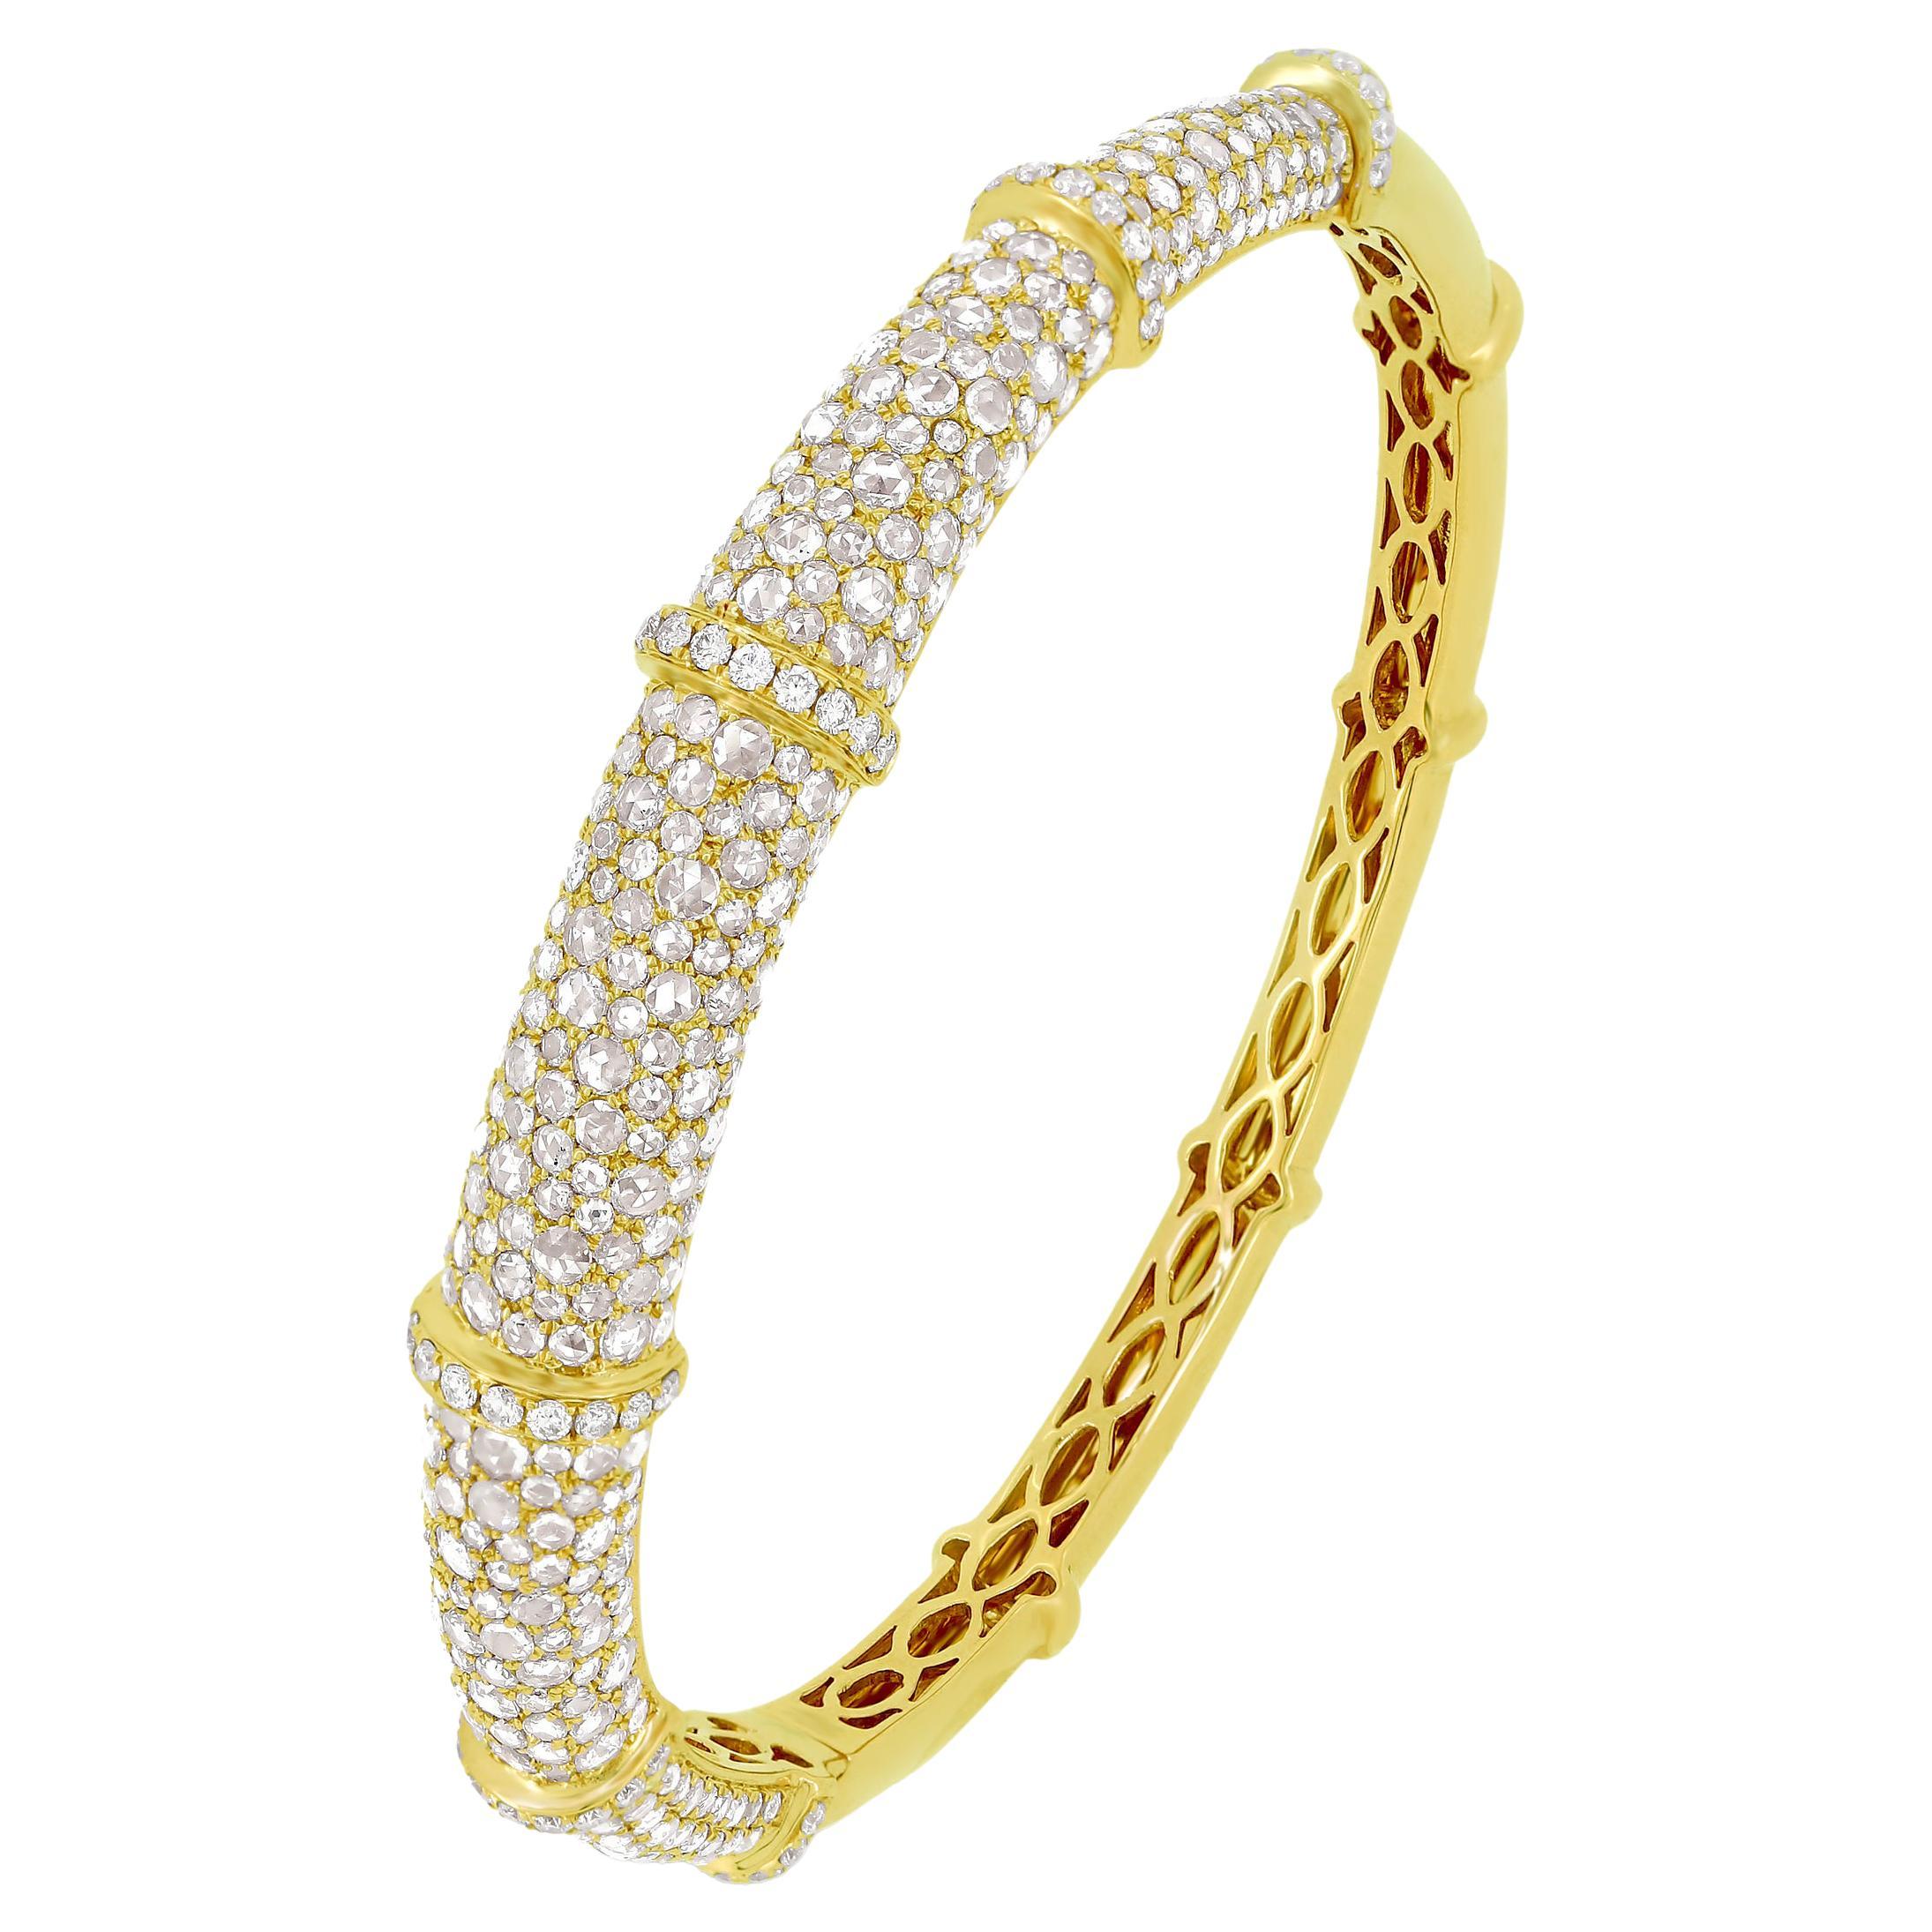 This beautiful bangle bracelet is made by Nigaam in 18 karat yellow gold and 5.21 carat diamond. The stunning bangle is pave set with round-brilliant cut diamonds on its top front and lattice designs accentuating its inner back. The bangle bracelet